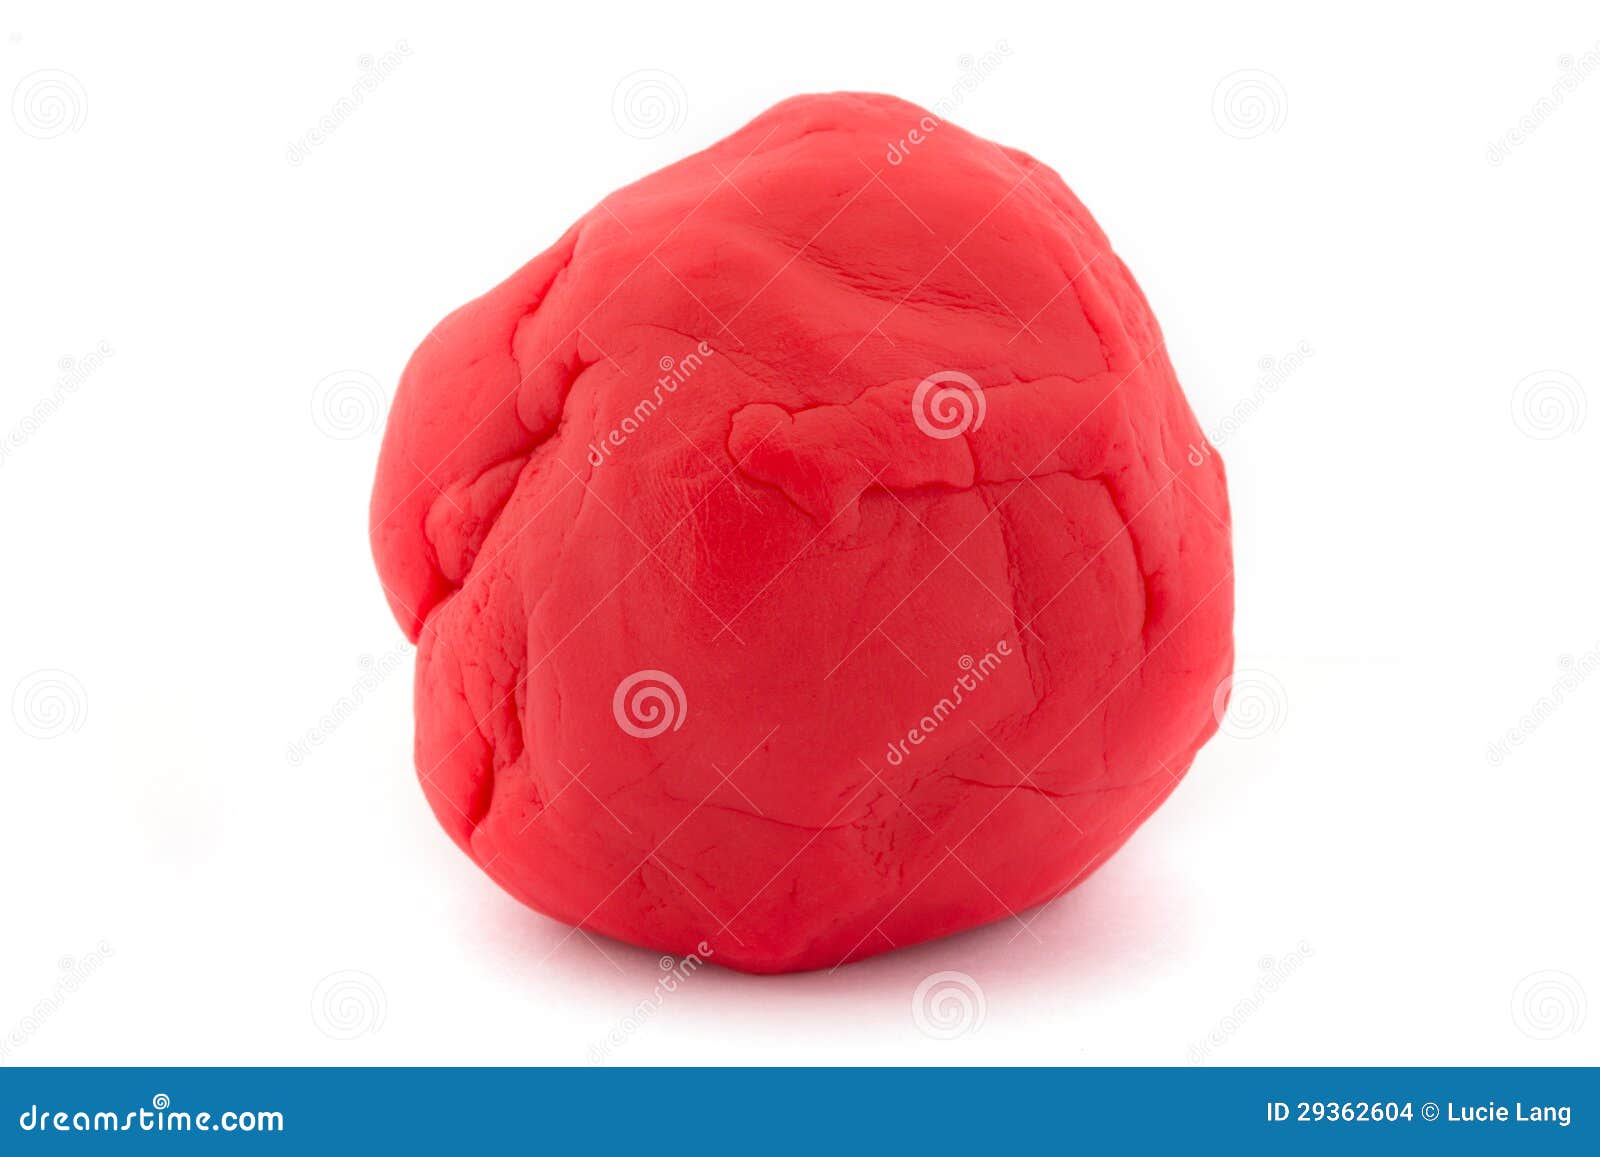 ball of red play dough on white